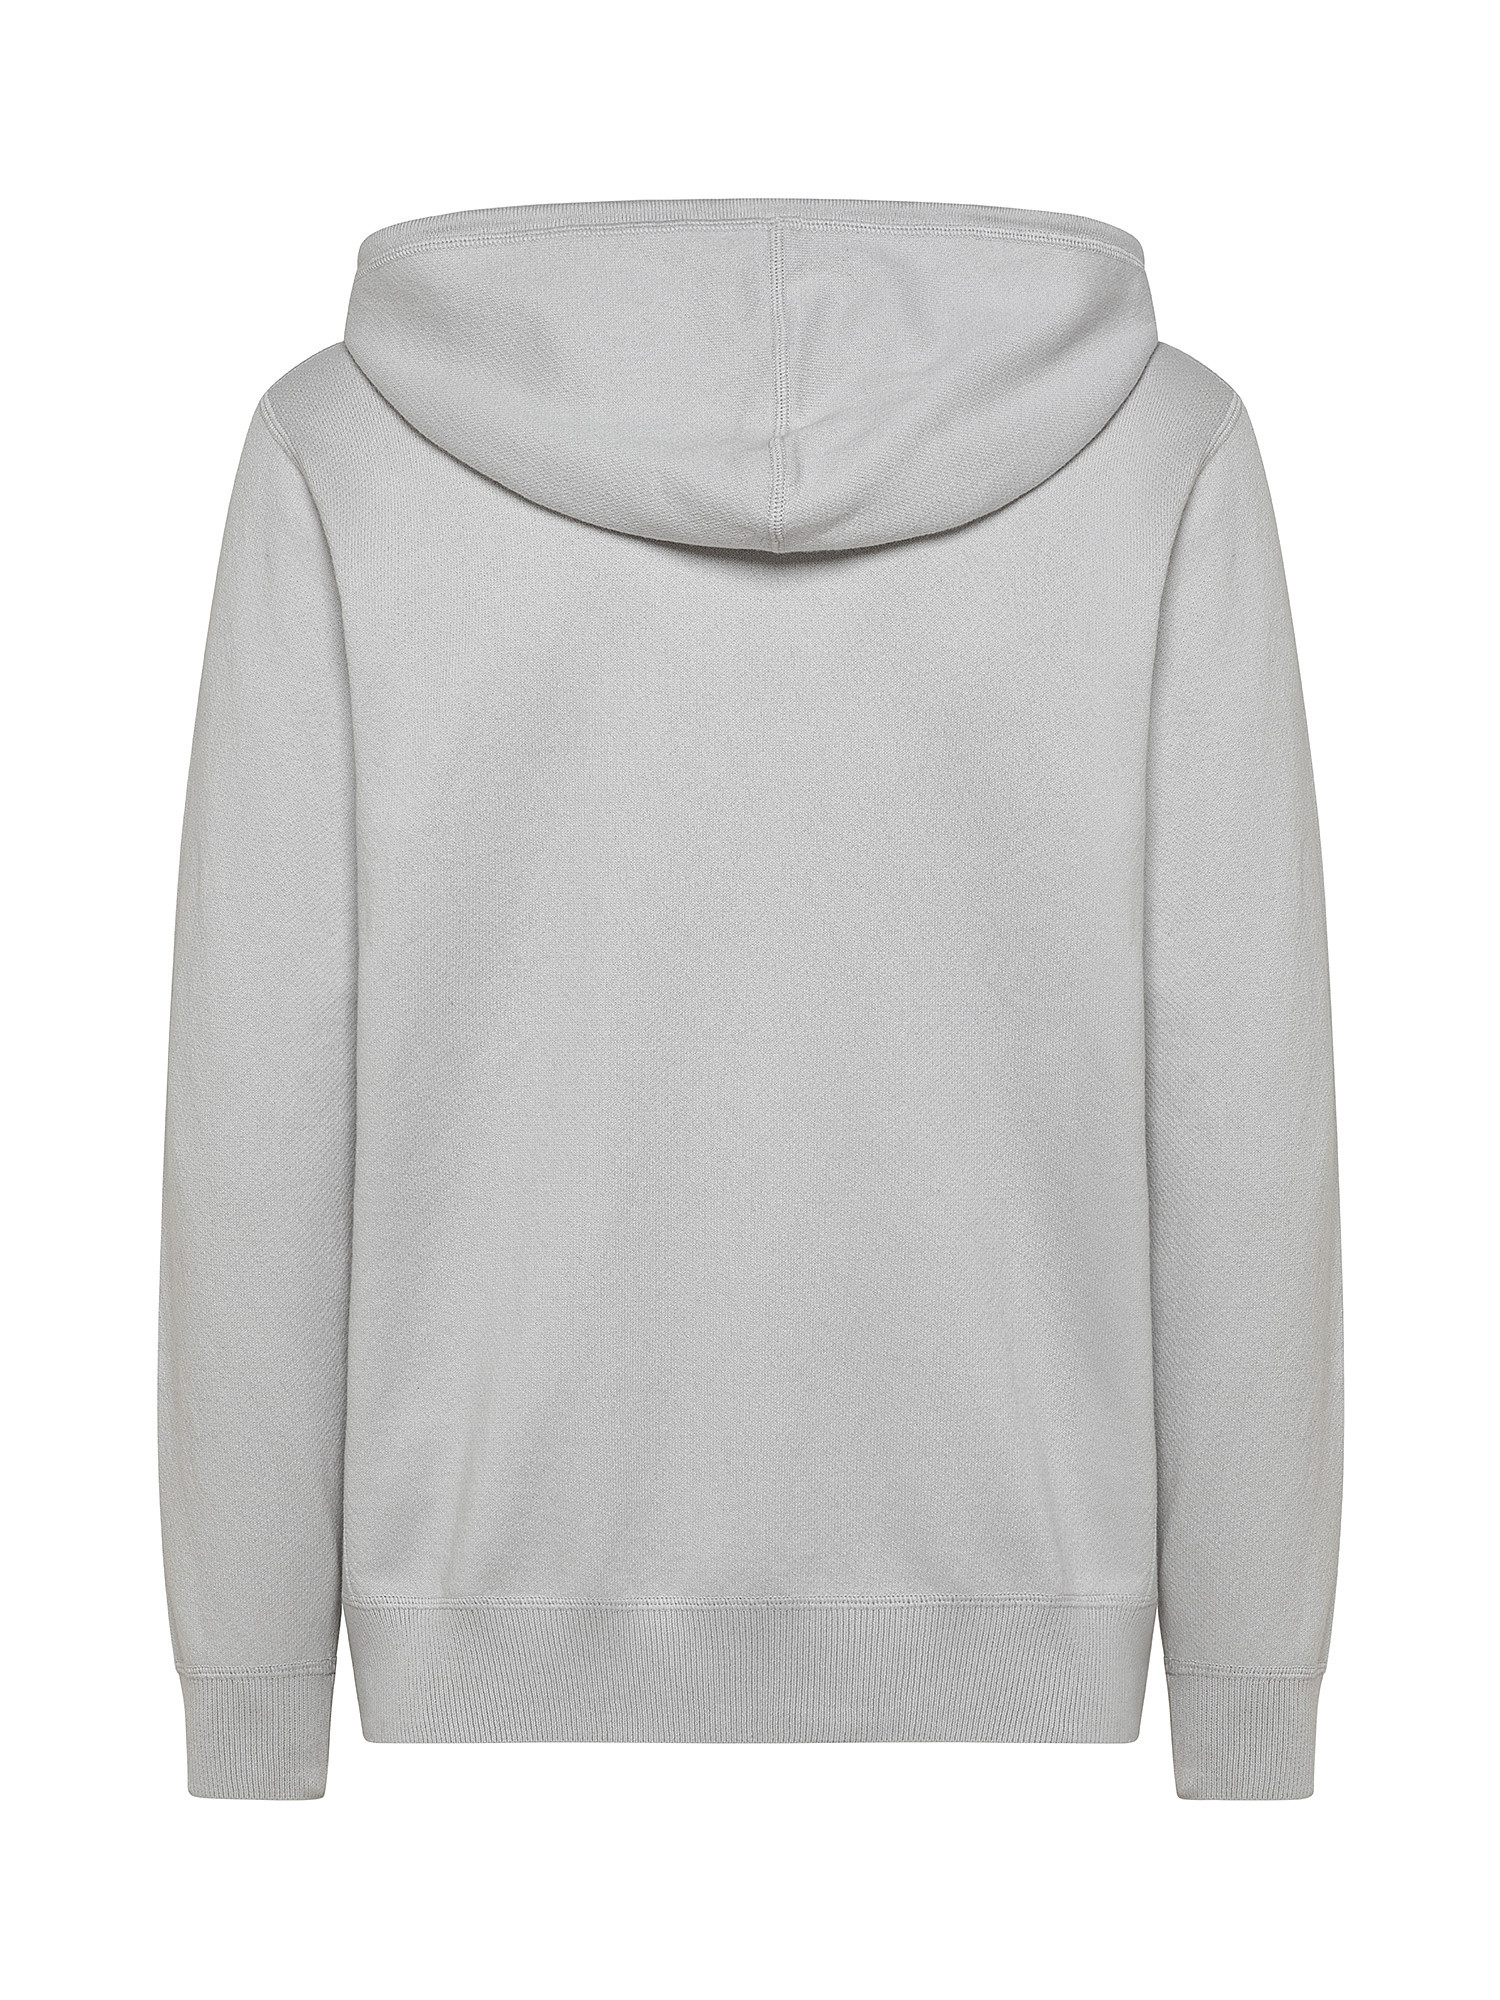 Hooded sweatshirt in cashmere knit, Ice White, large image number 1